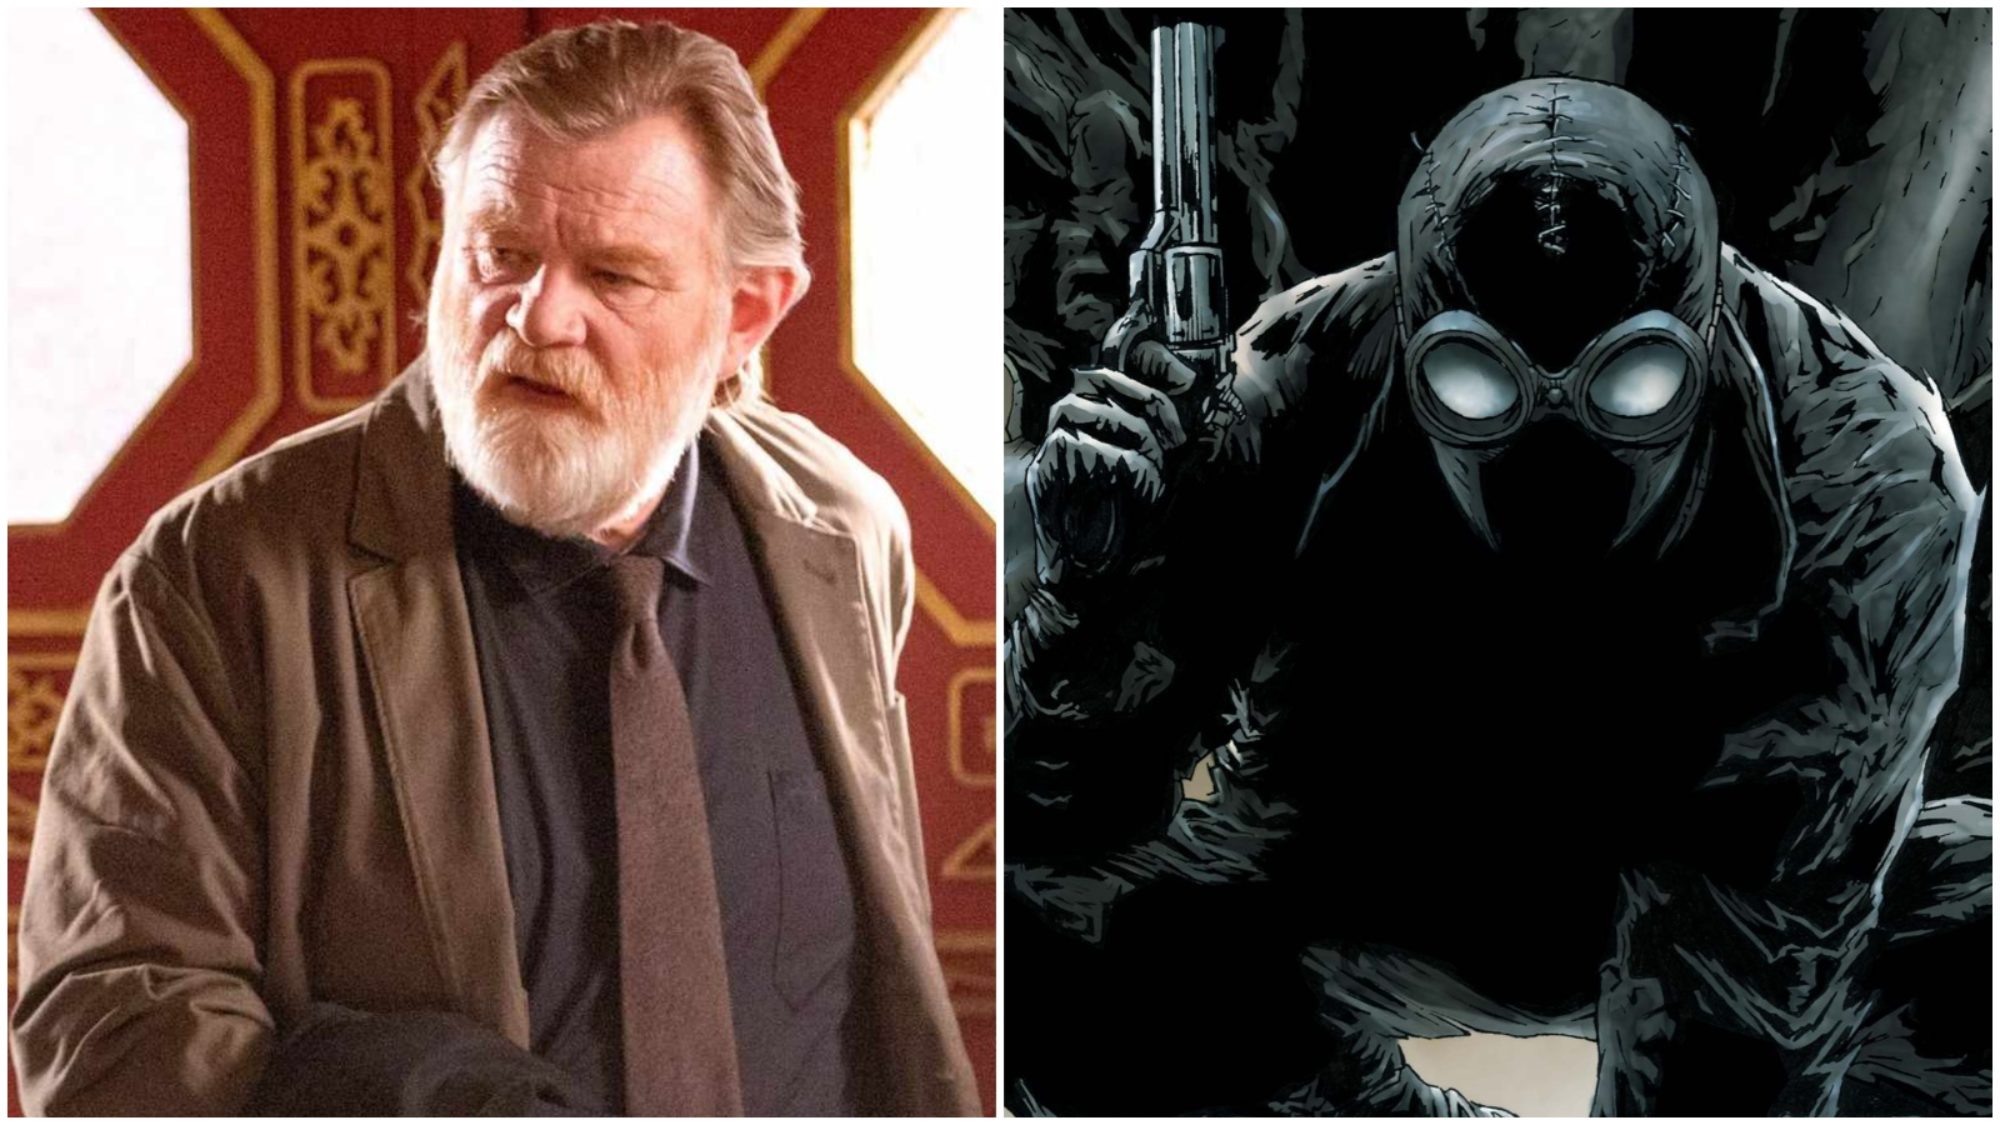 Brendan Gleeson reportedly joins the series cast